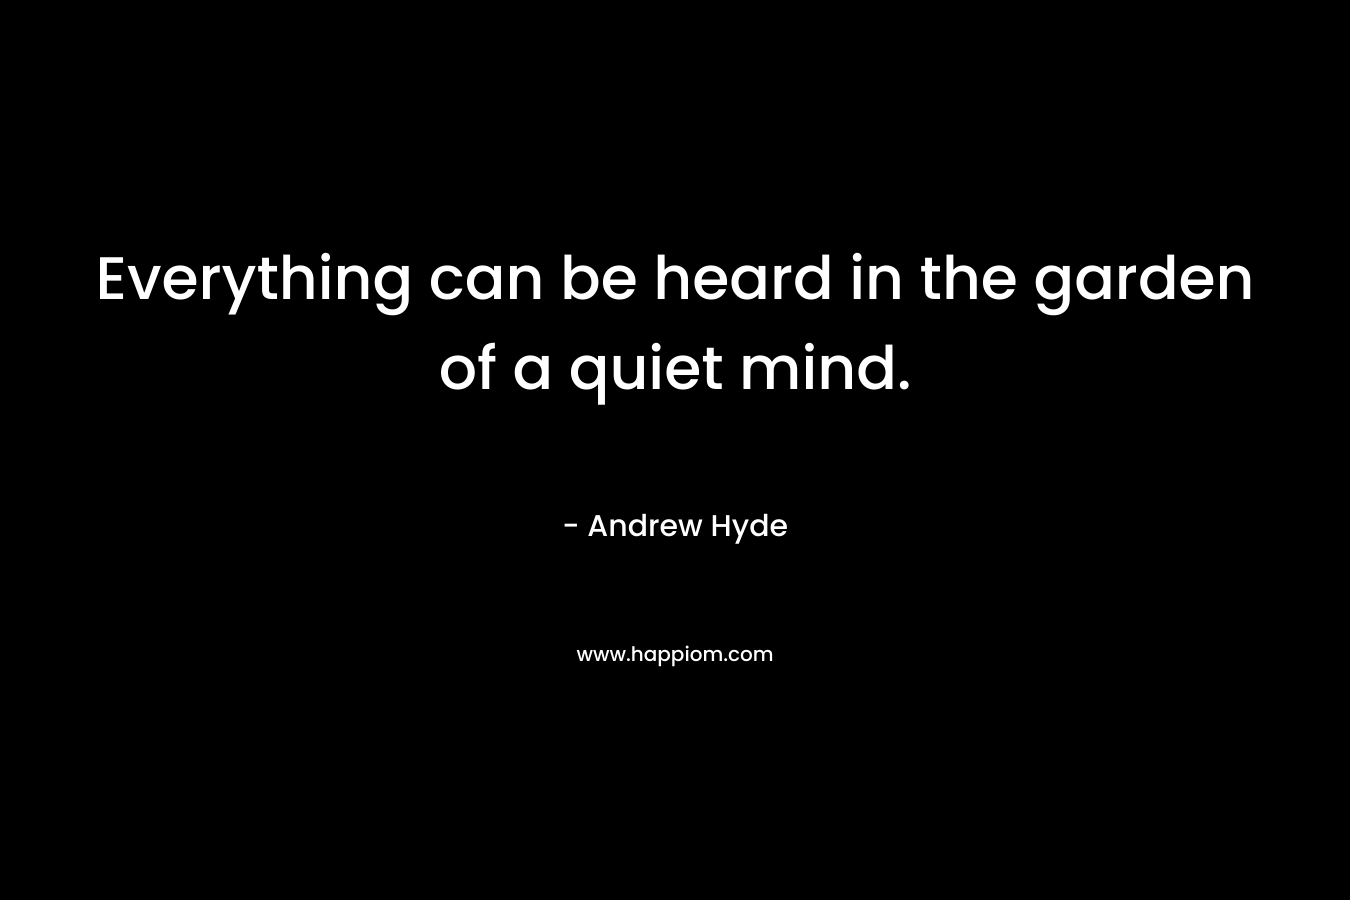 Everything can be heard in the garden of a quiet mind. – Andrew Hyde